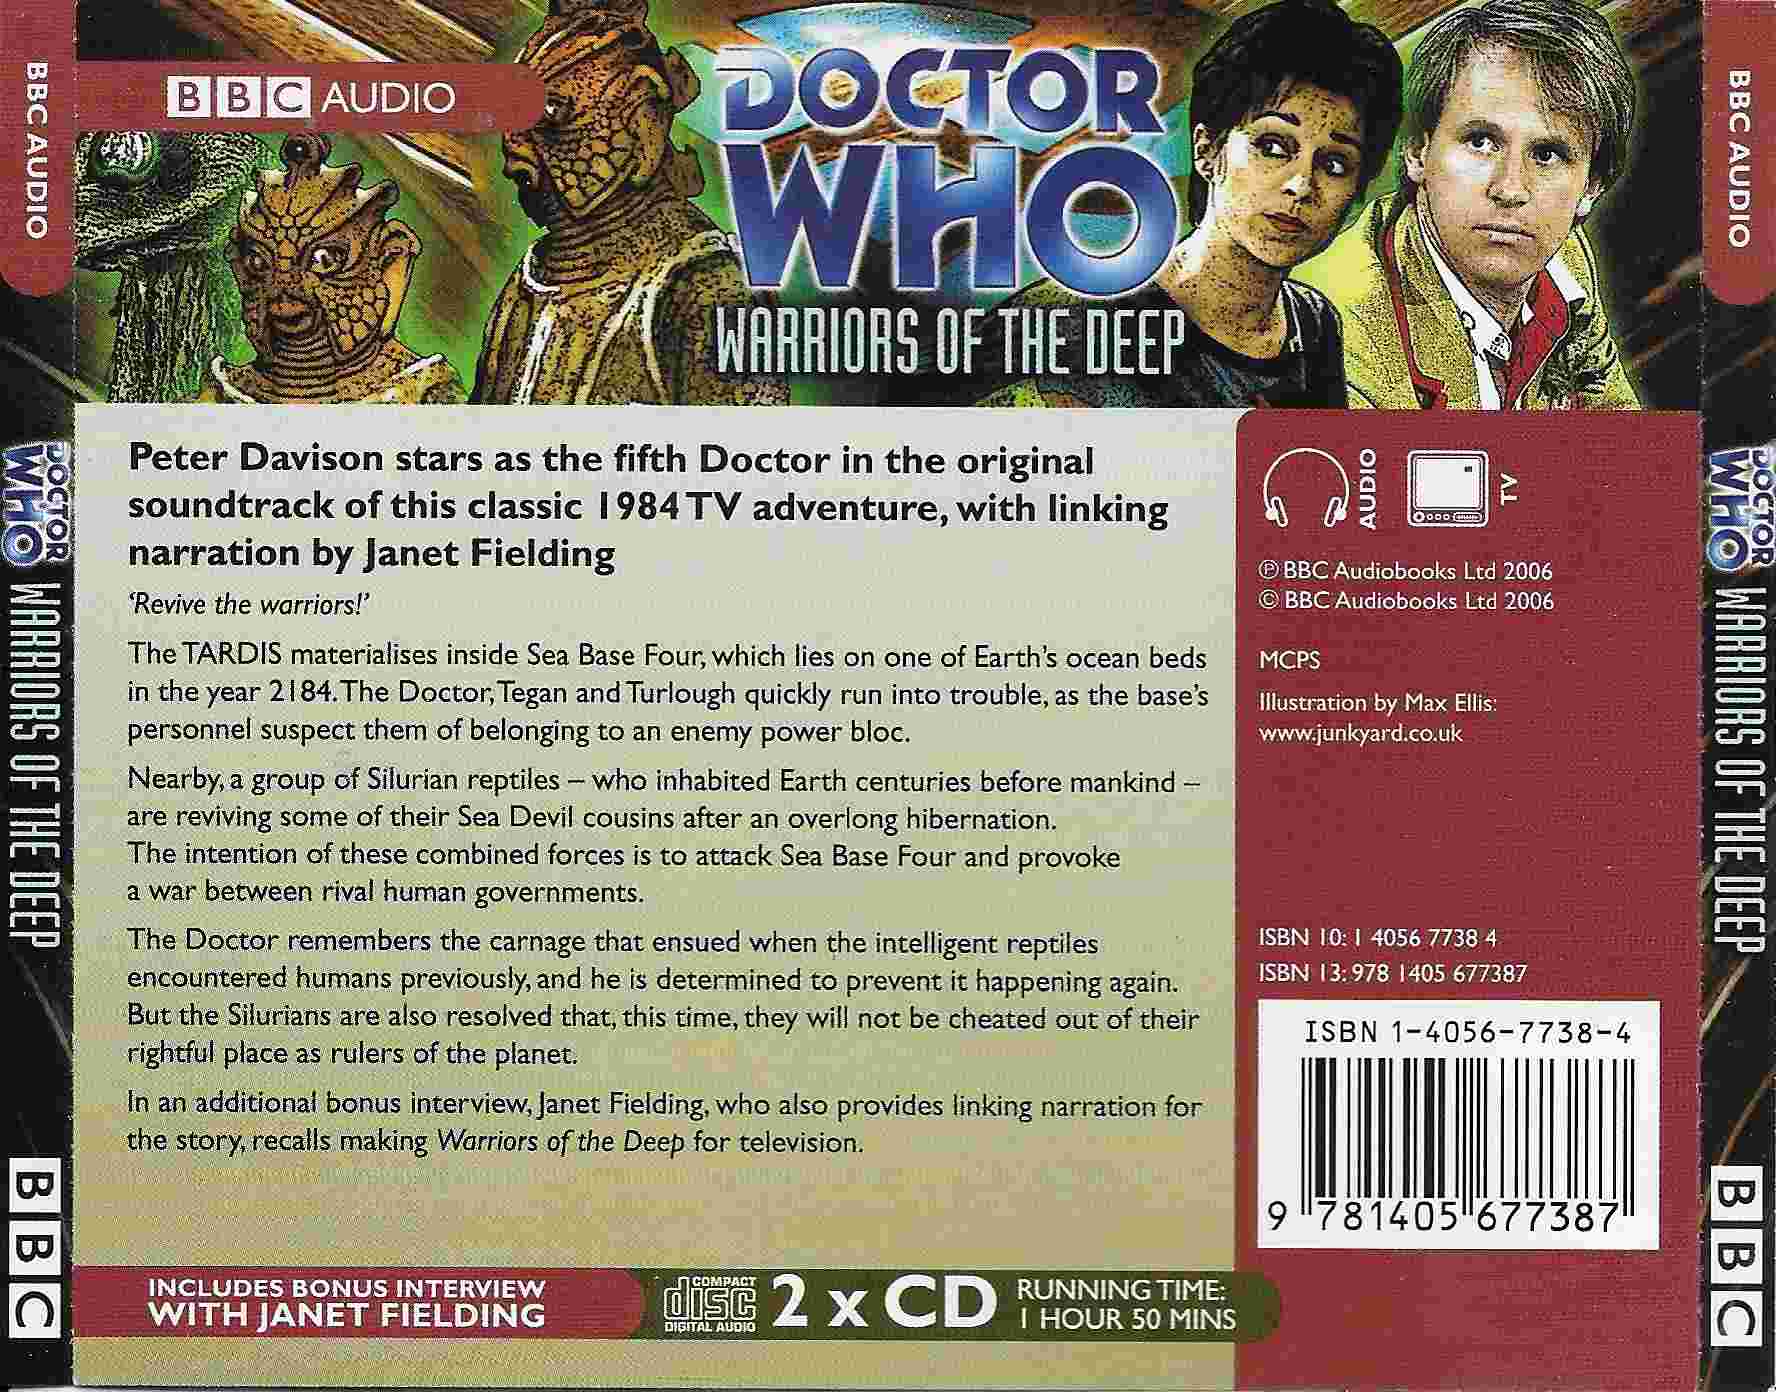 Picture of ISBN 1-4056-7738-4 Doctor Who - Warriors of the deep by artist Johnny Byrne from the BBC records and Tapes library